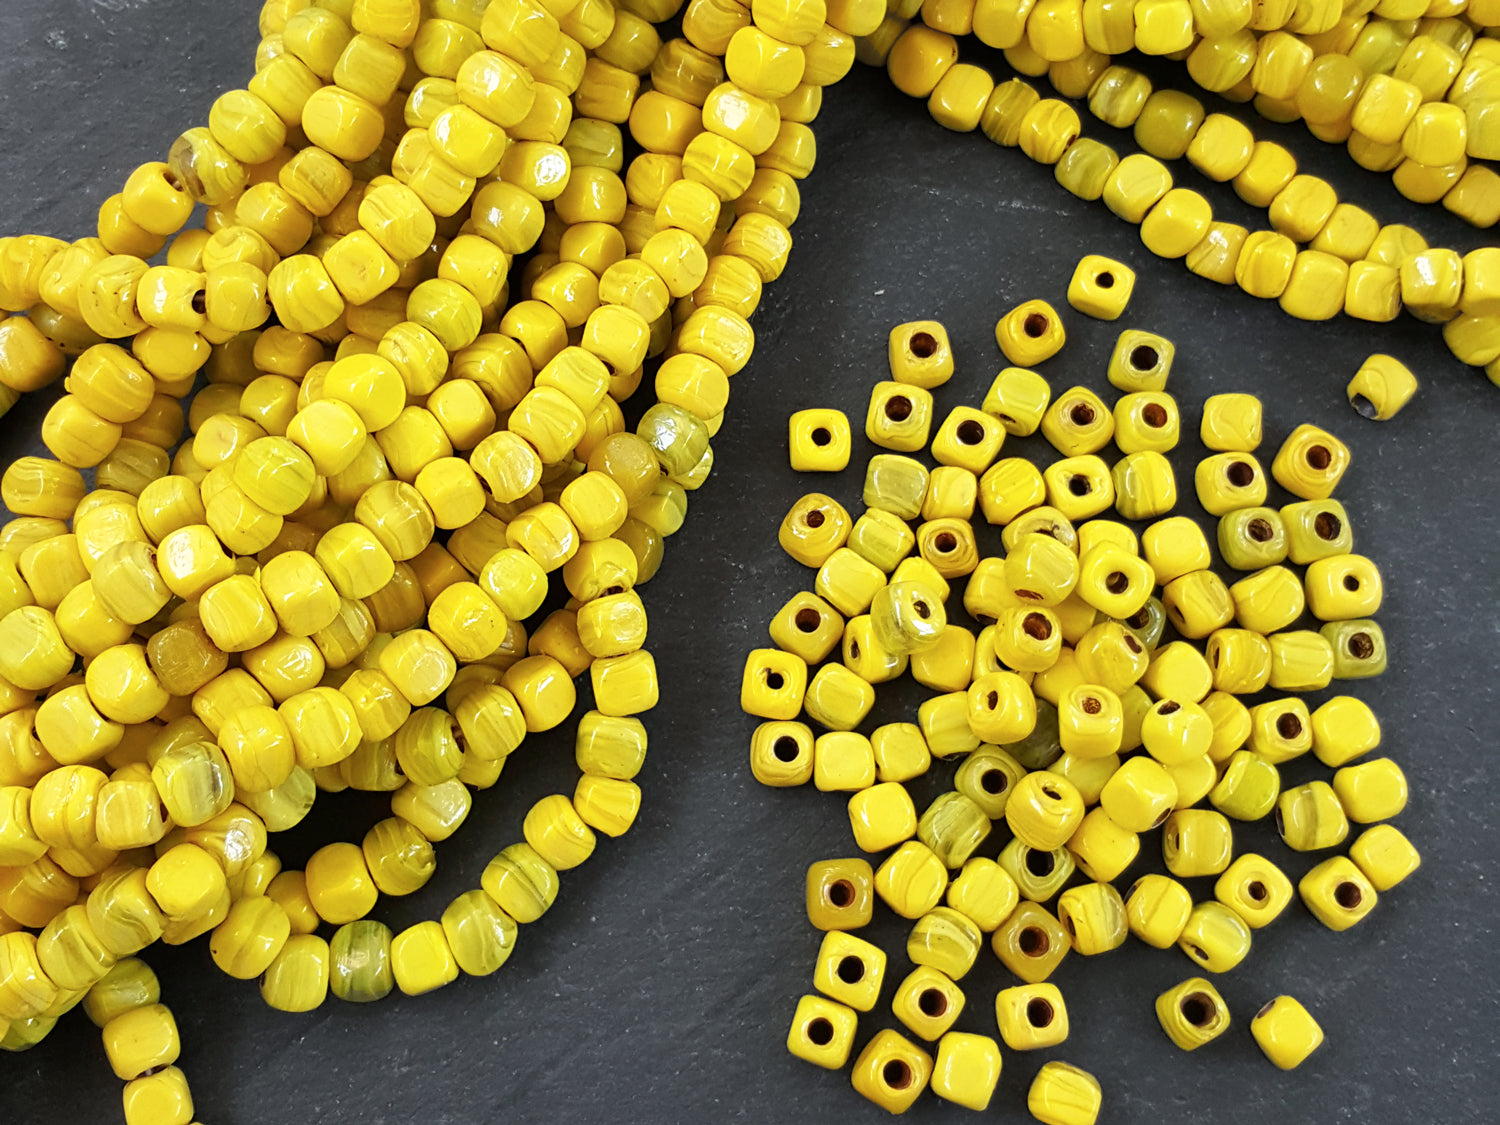 RARE Canary Yellow Antique Italian Glass Seed Beads 2mm Vivid Retro-yellow Glass  Beads for Embroidery & Jewelry Making CV235 